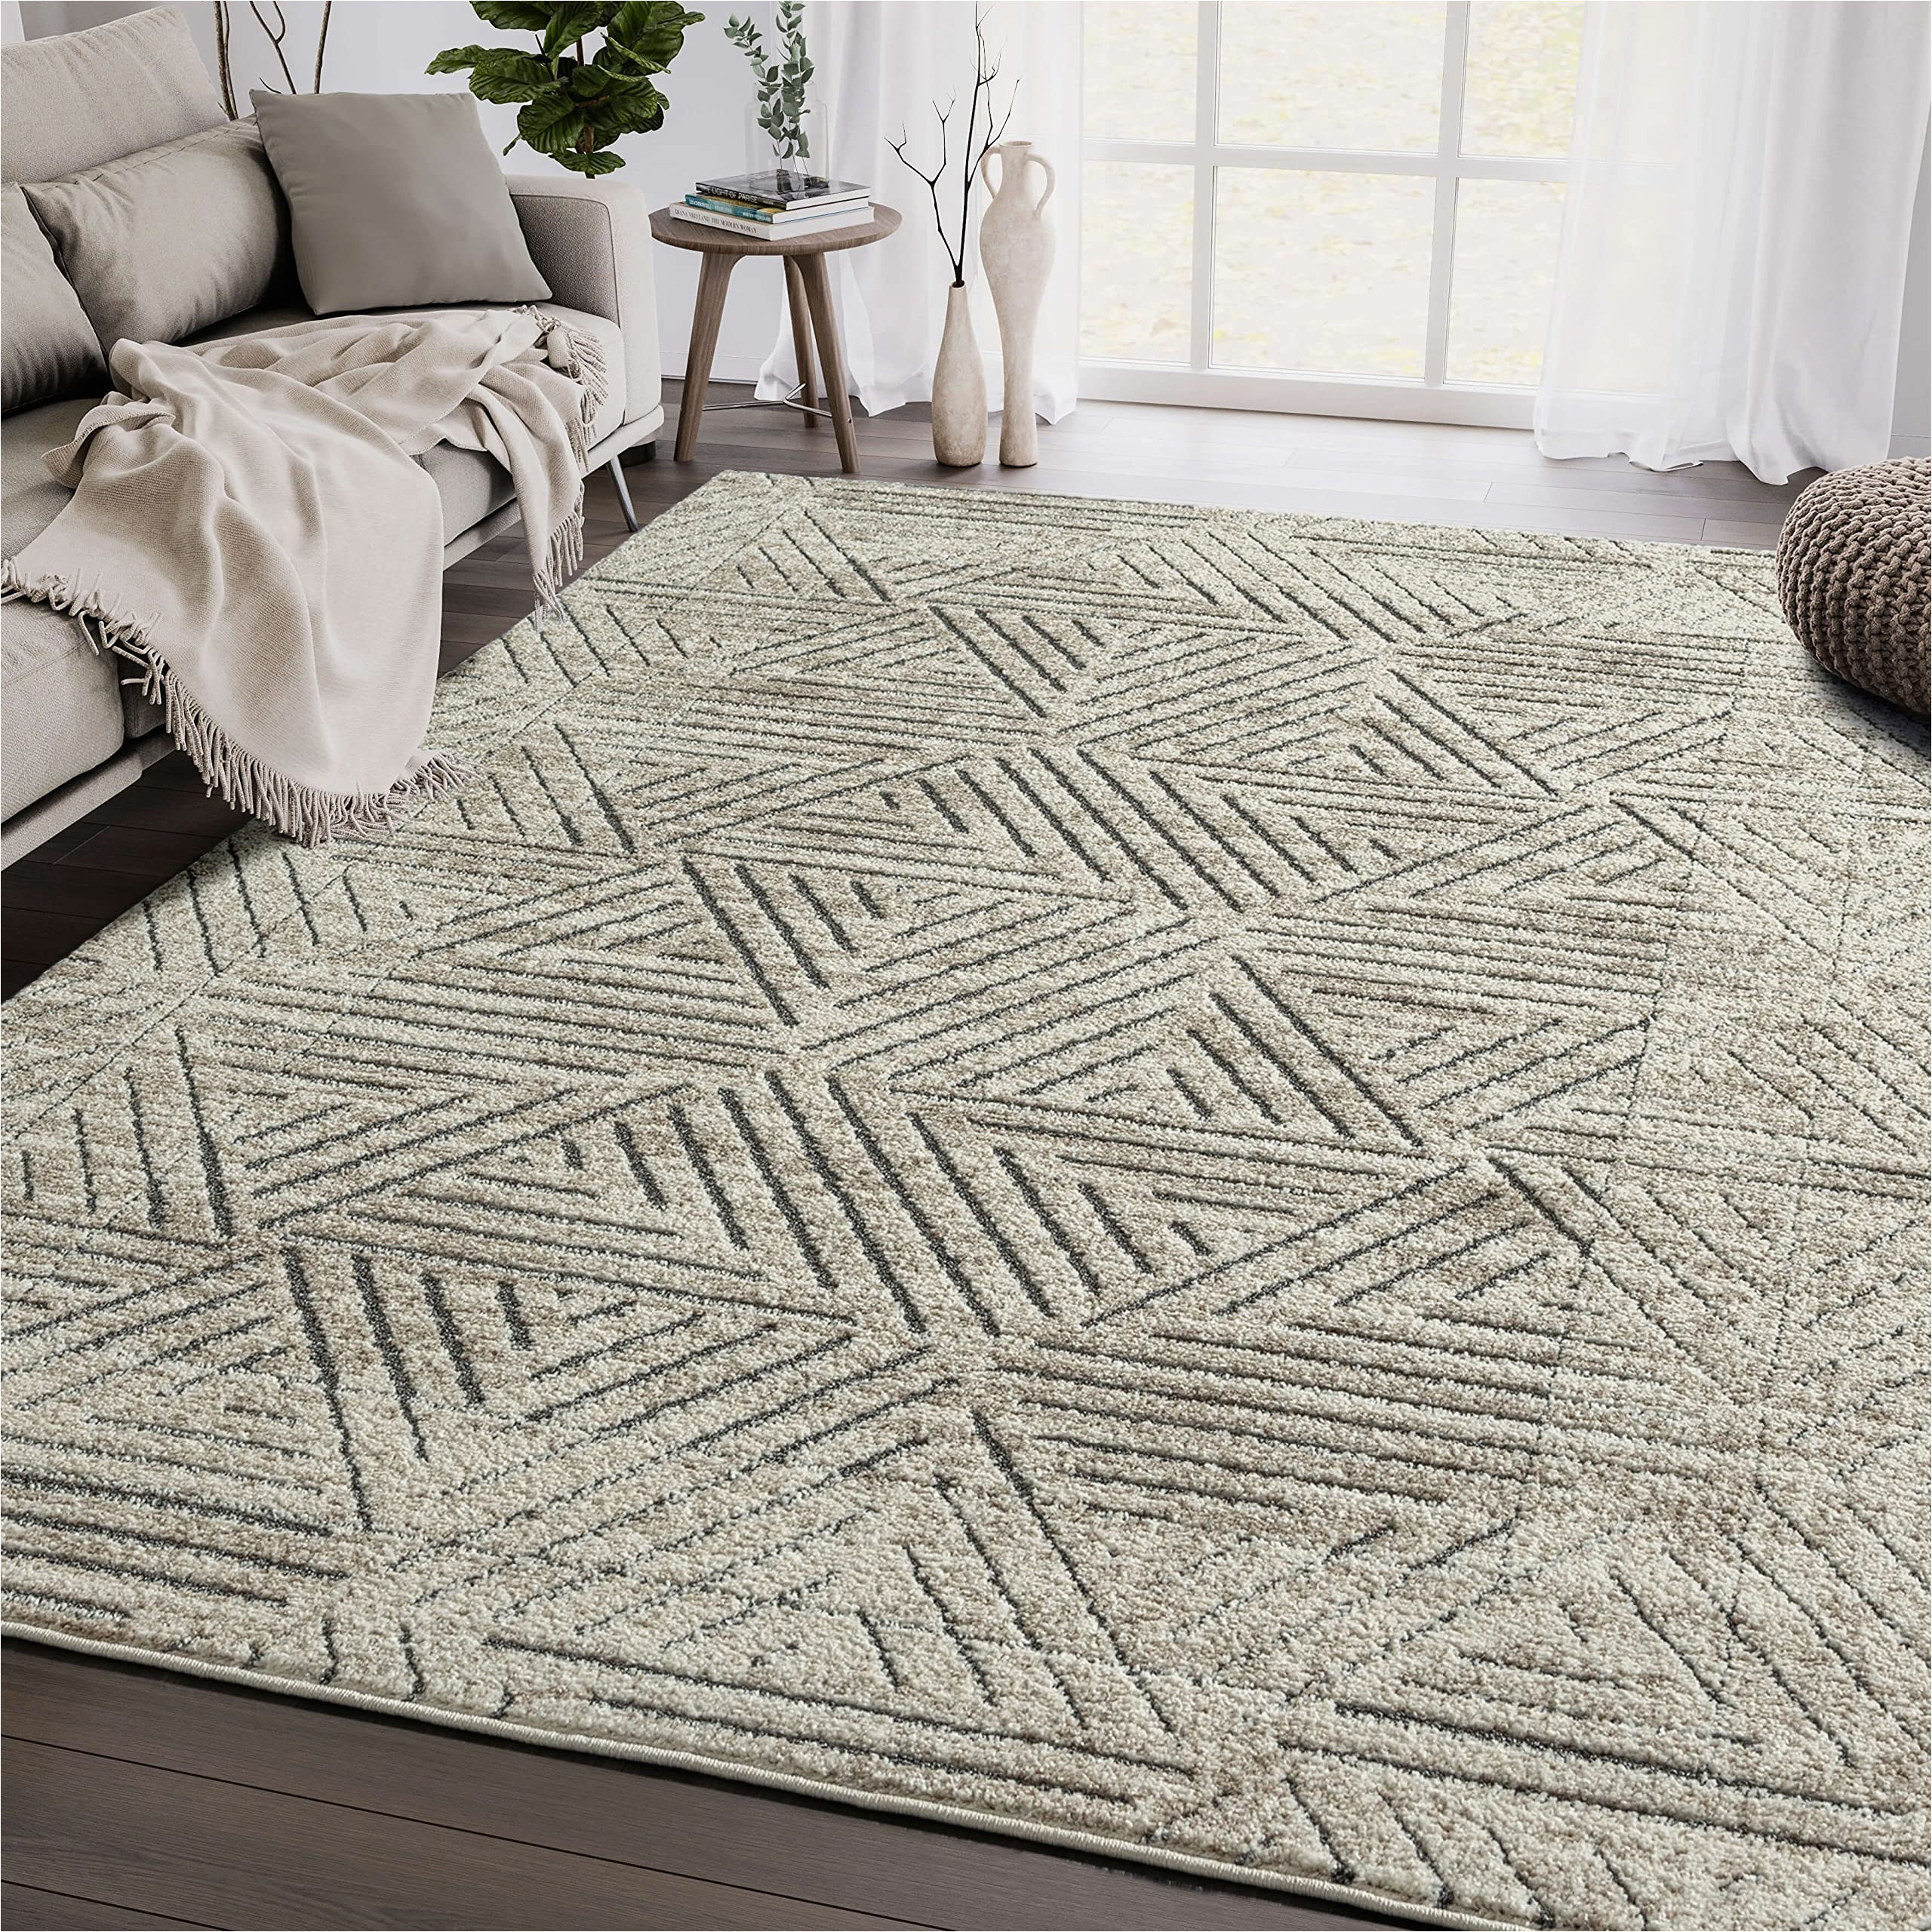 Area Rugs Beige and Gray Contemporary Cream & Grey Geometric area Rug – Non-shed Abani Rugs Modern Beige Triangle Pattern 4′ X 6′ Living Room Carpet